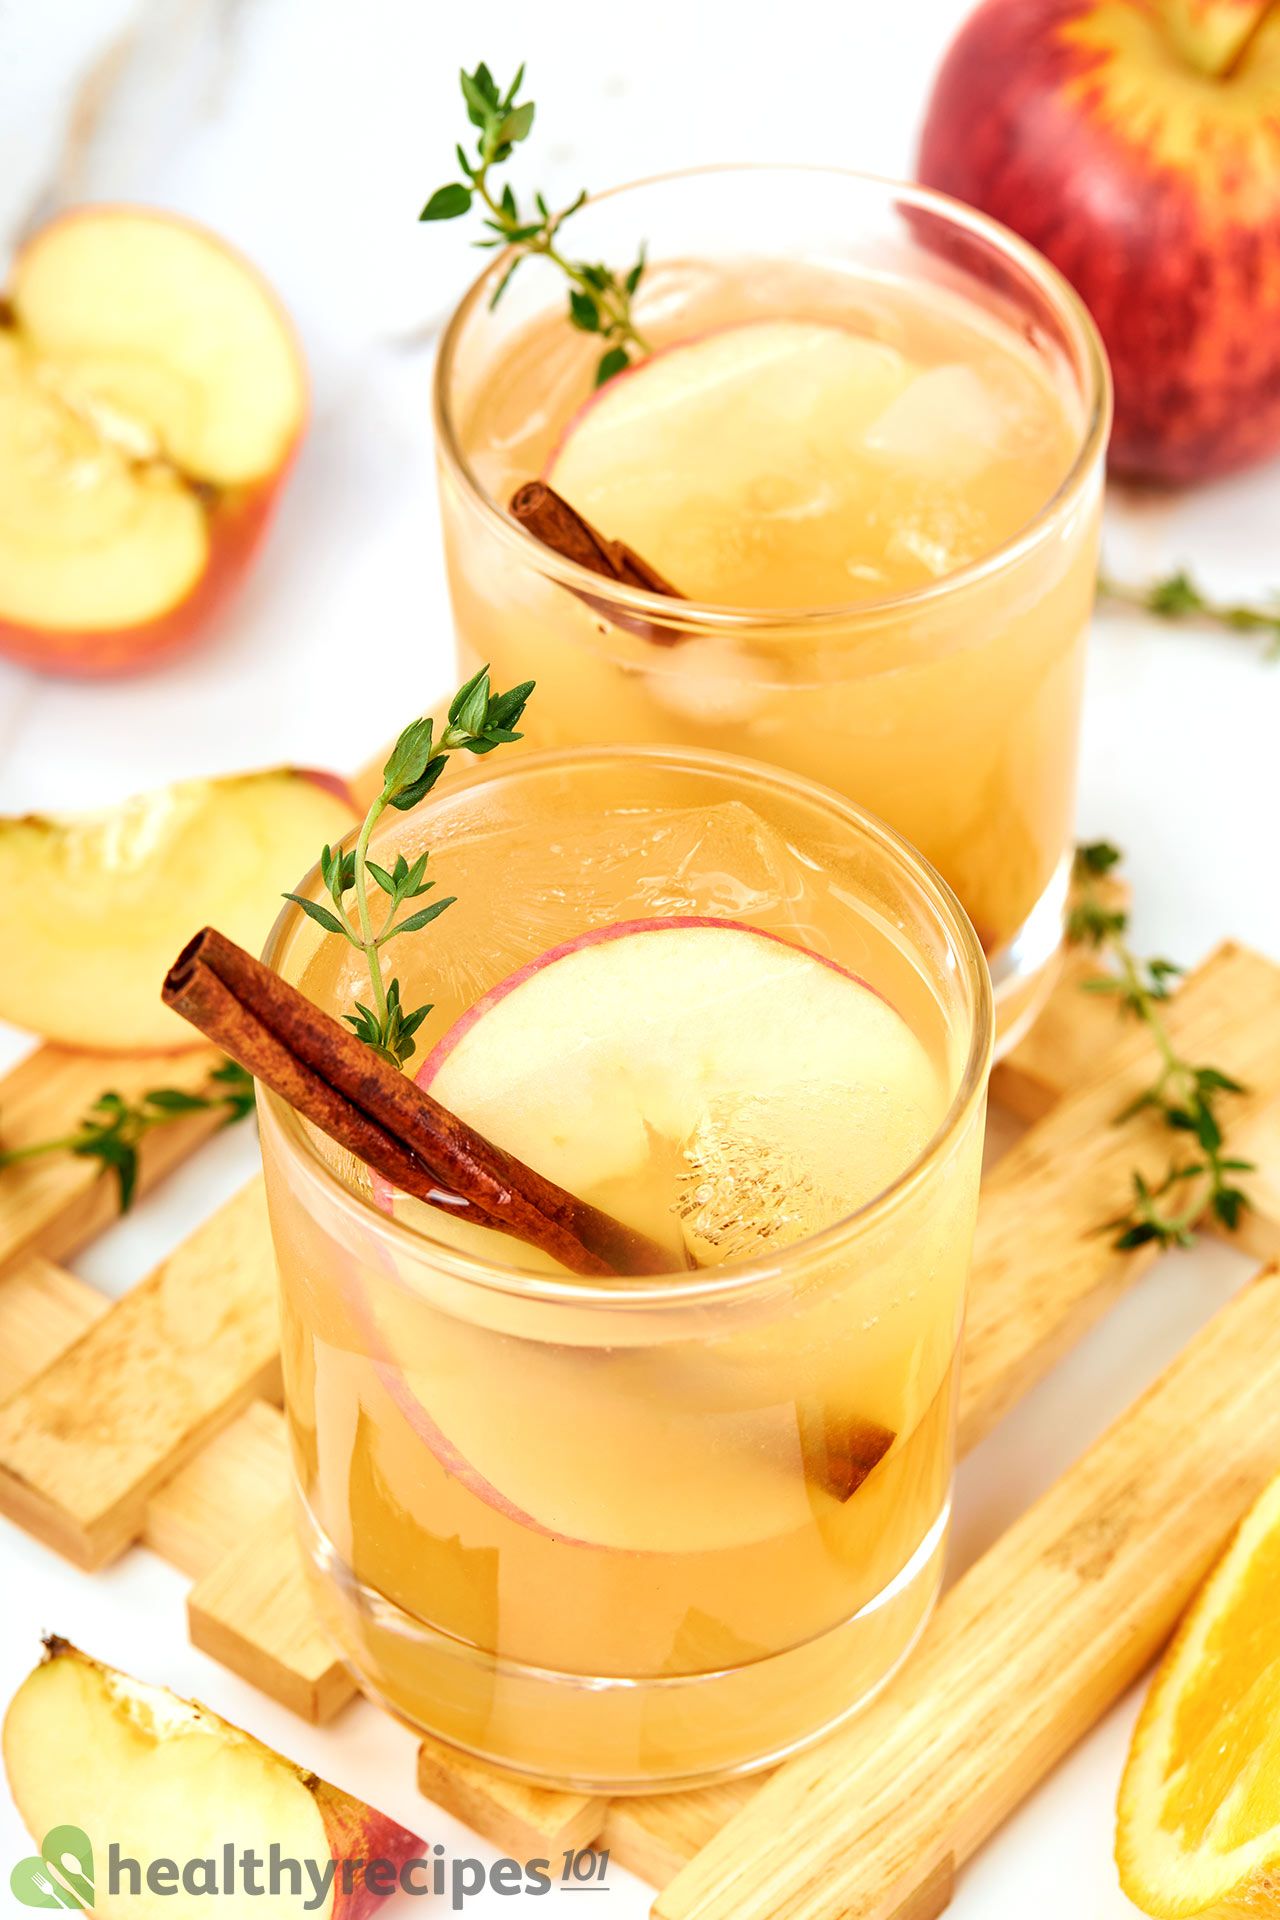 How Long Does Apple Cider Cocktail Last